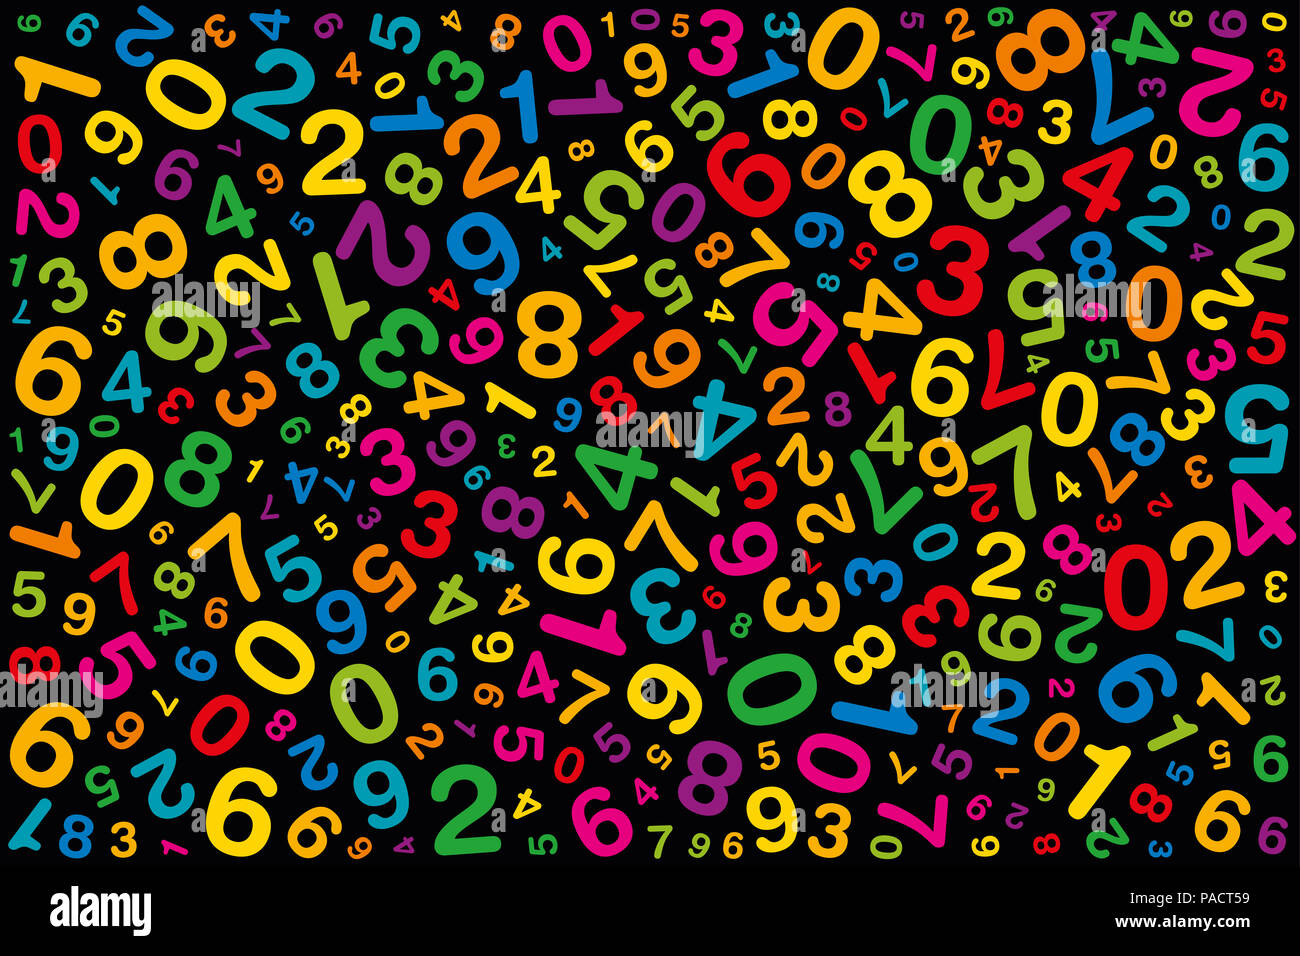 Twisted colored numbers. Randomly distributed numerals. Symbol image for numerology or flood of data. One to zero disorganized of different sizes. Stock Photo